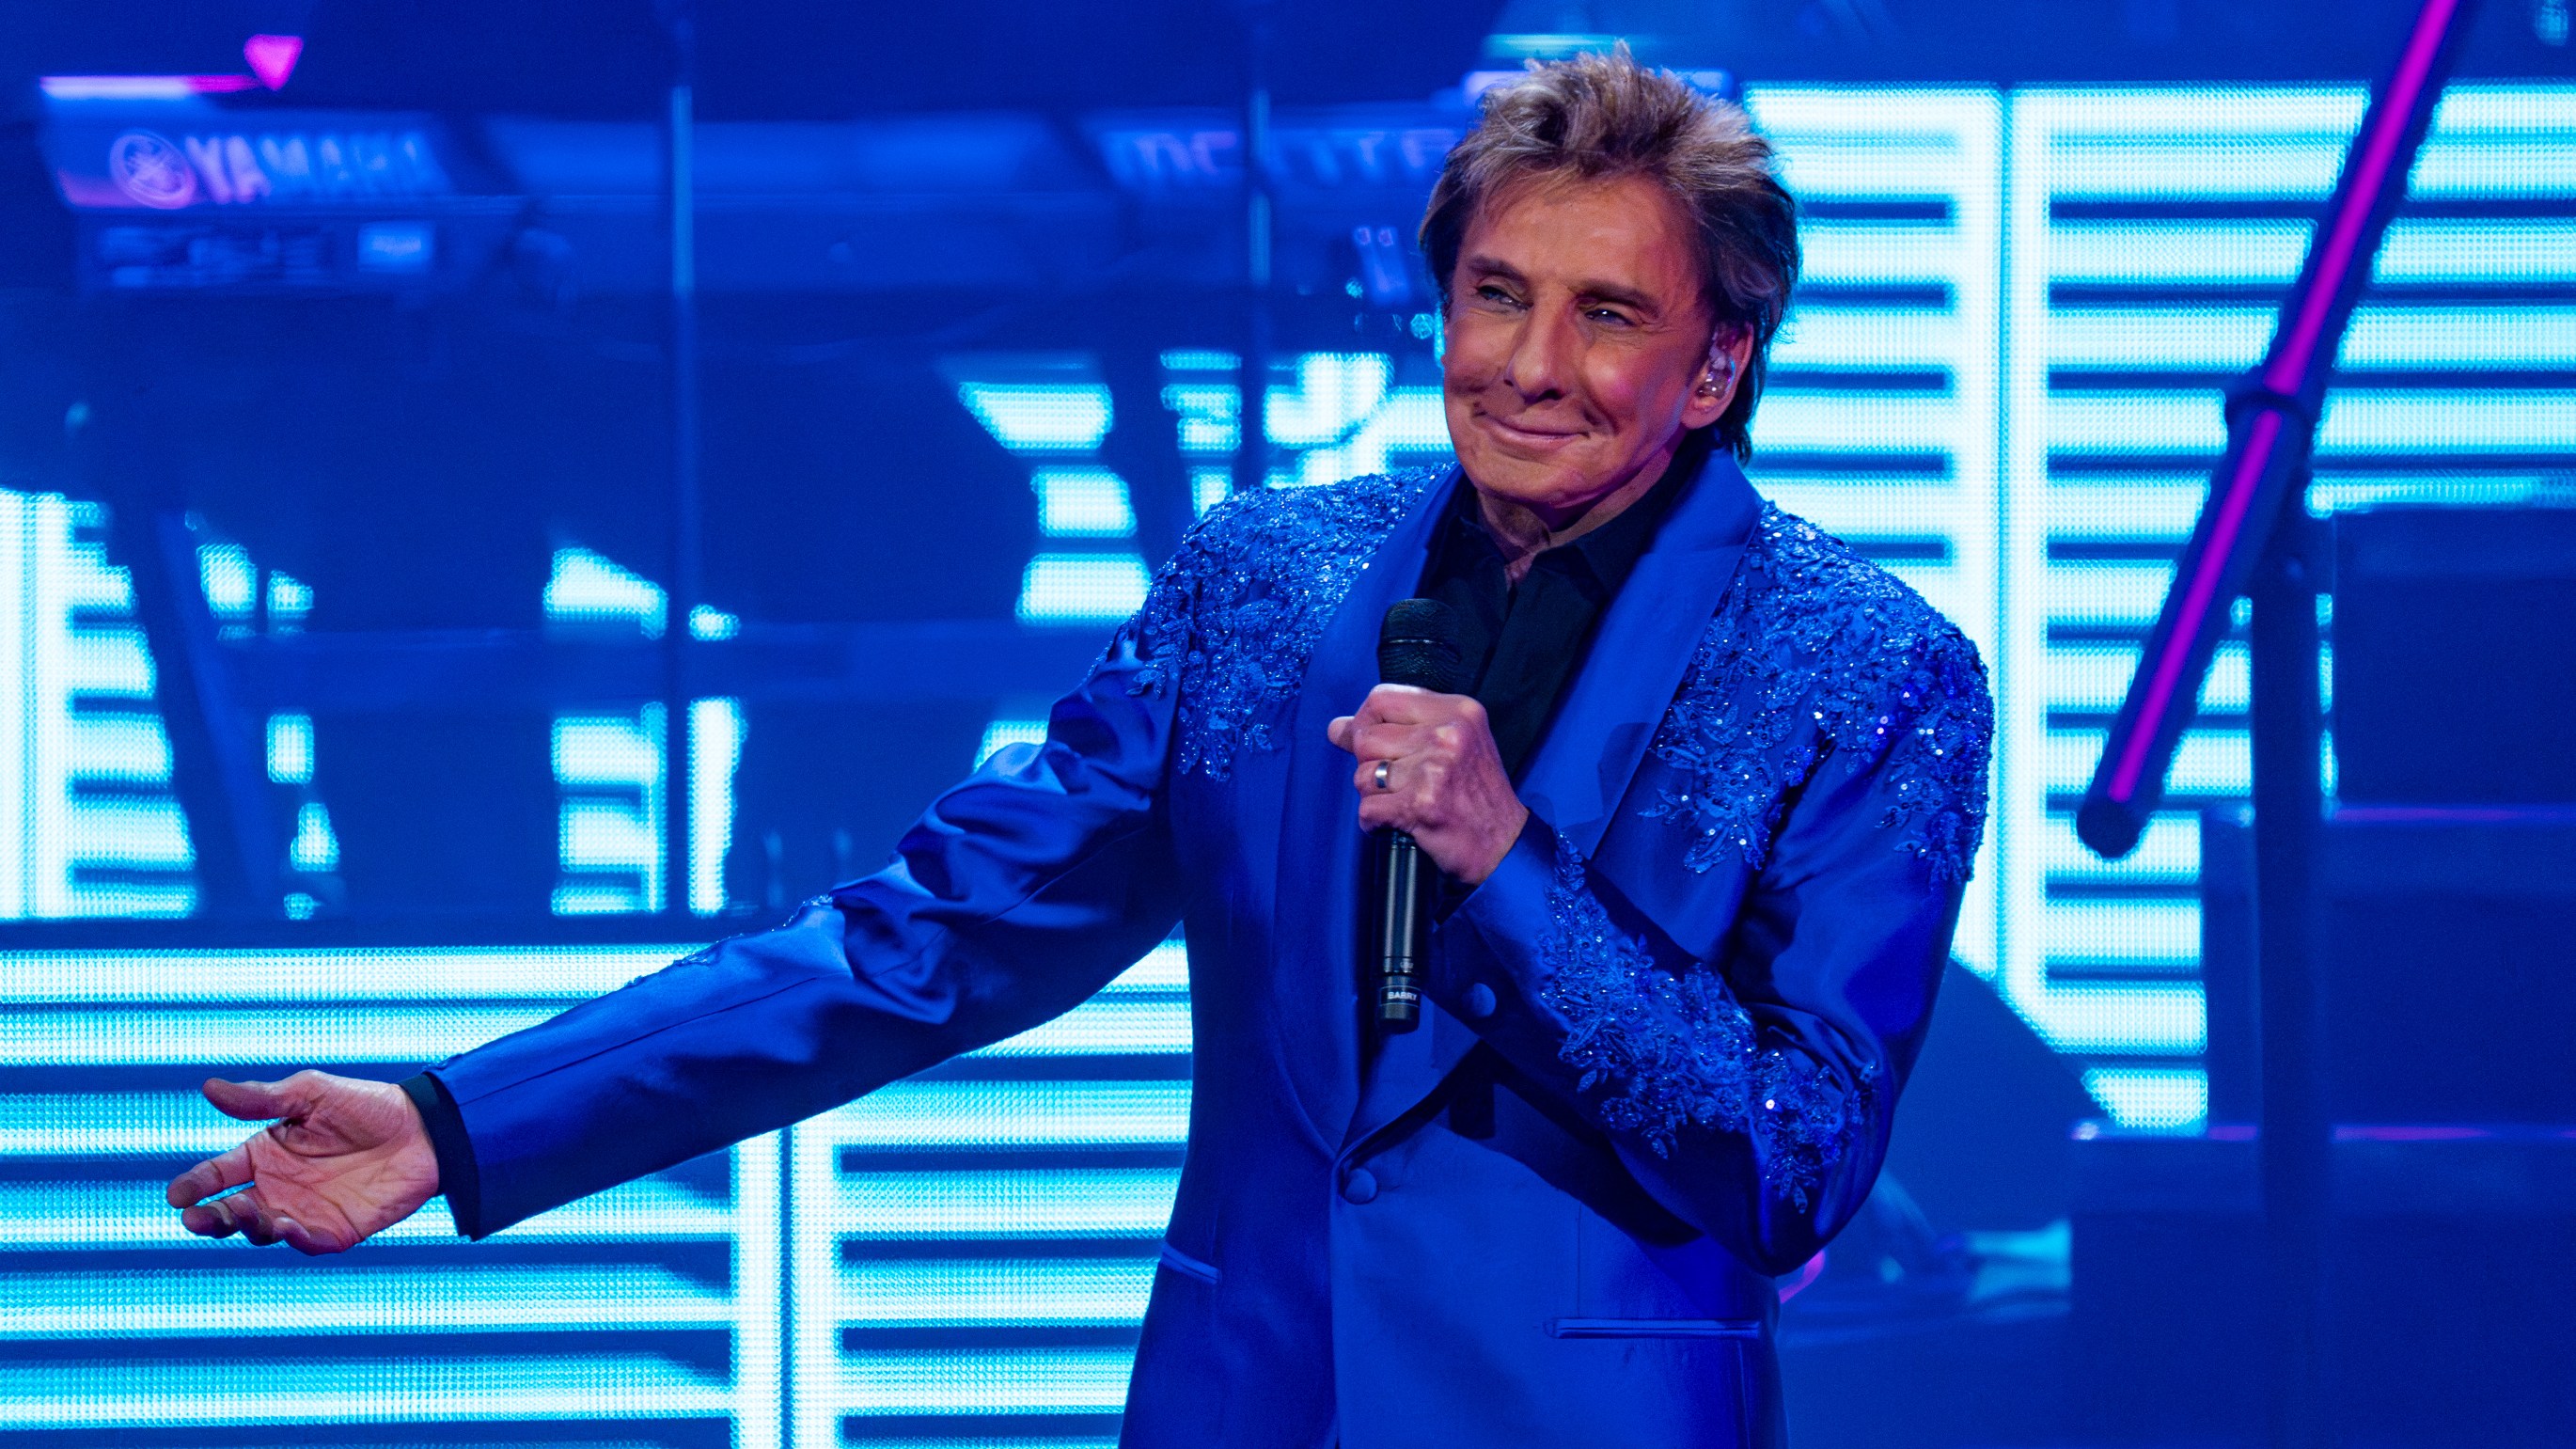 Barry Manilow gave his audience hits and glitz but also welcomed silliness and self-deprecation